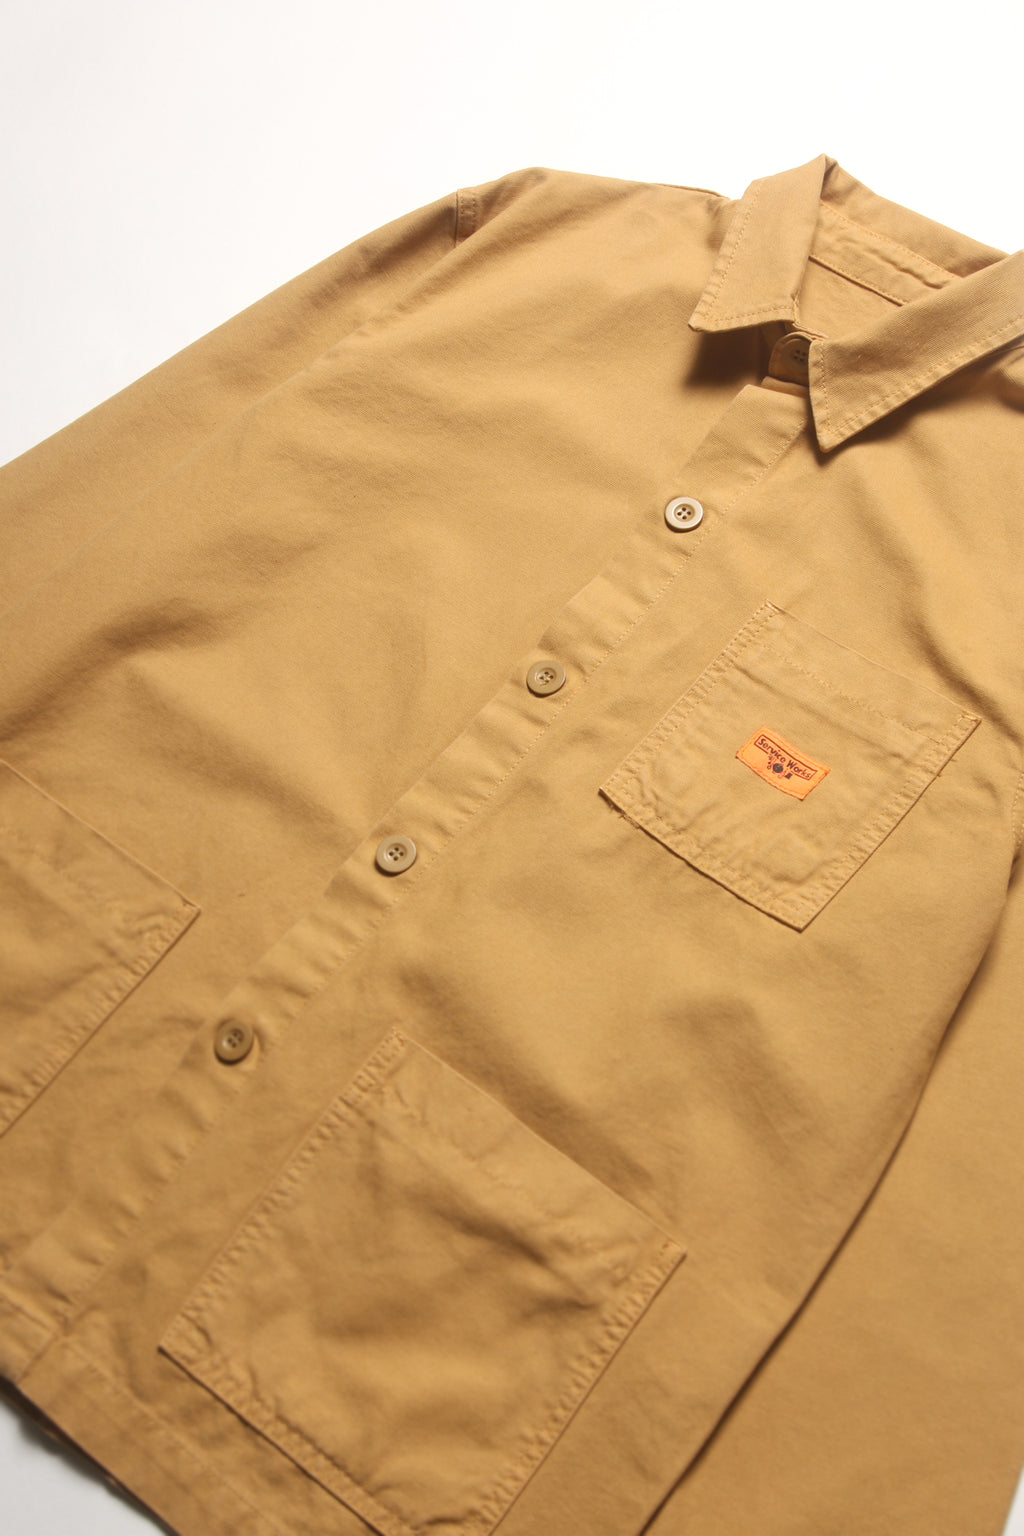 Service Works - Coverall Jacket - Tan